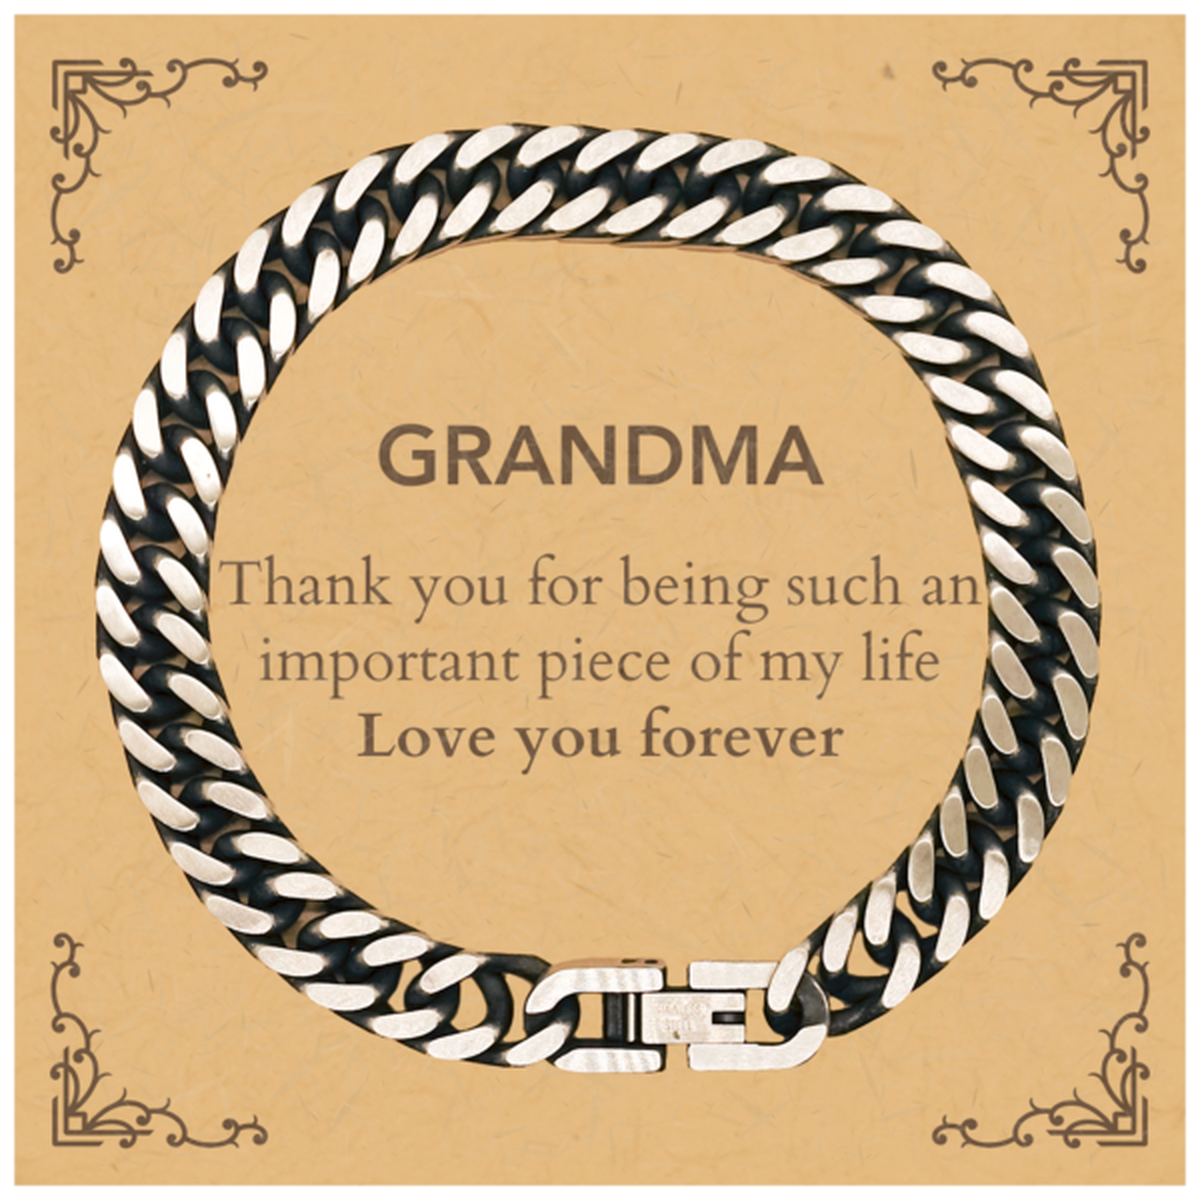 Appropriate Grandma Cuban Link Chain Bracelet Epic Birthday Gifts for Grandma Thank you for being such an important piece of my life Grandma Christmas Mothers Fathers Day